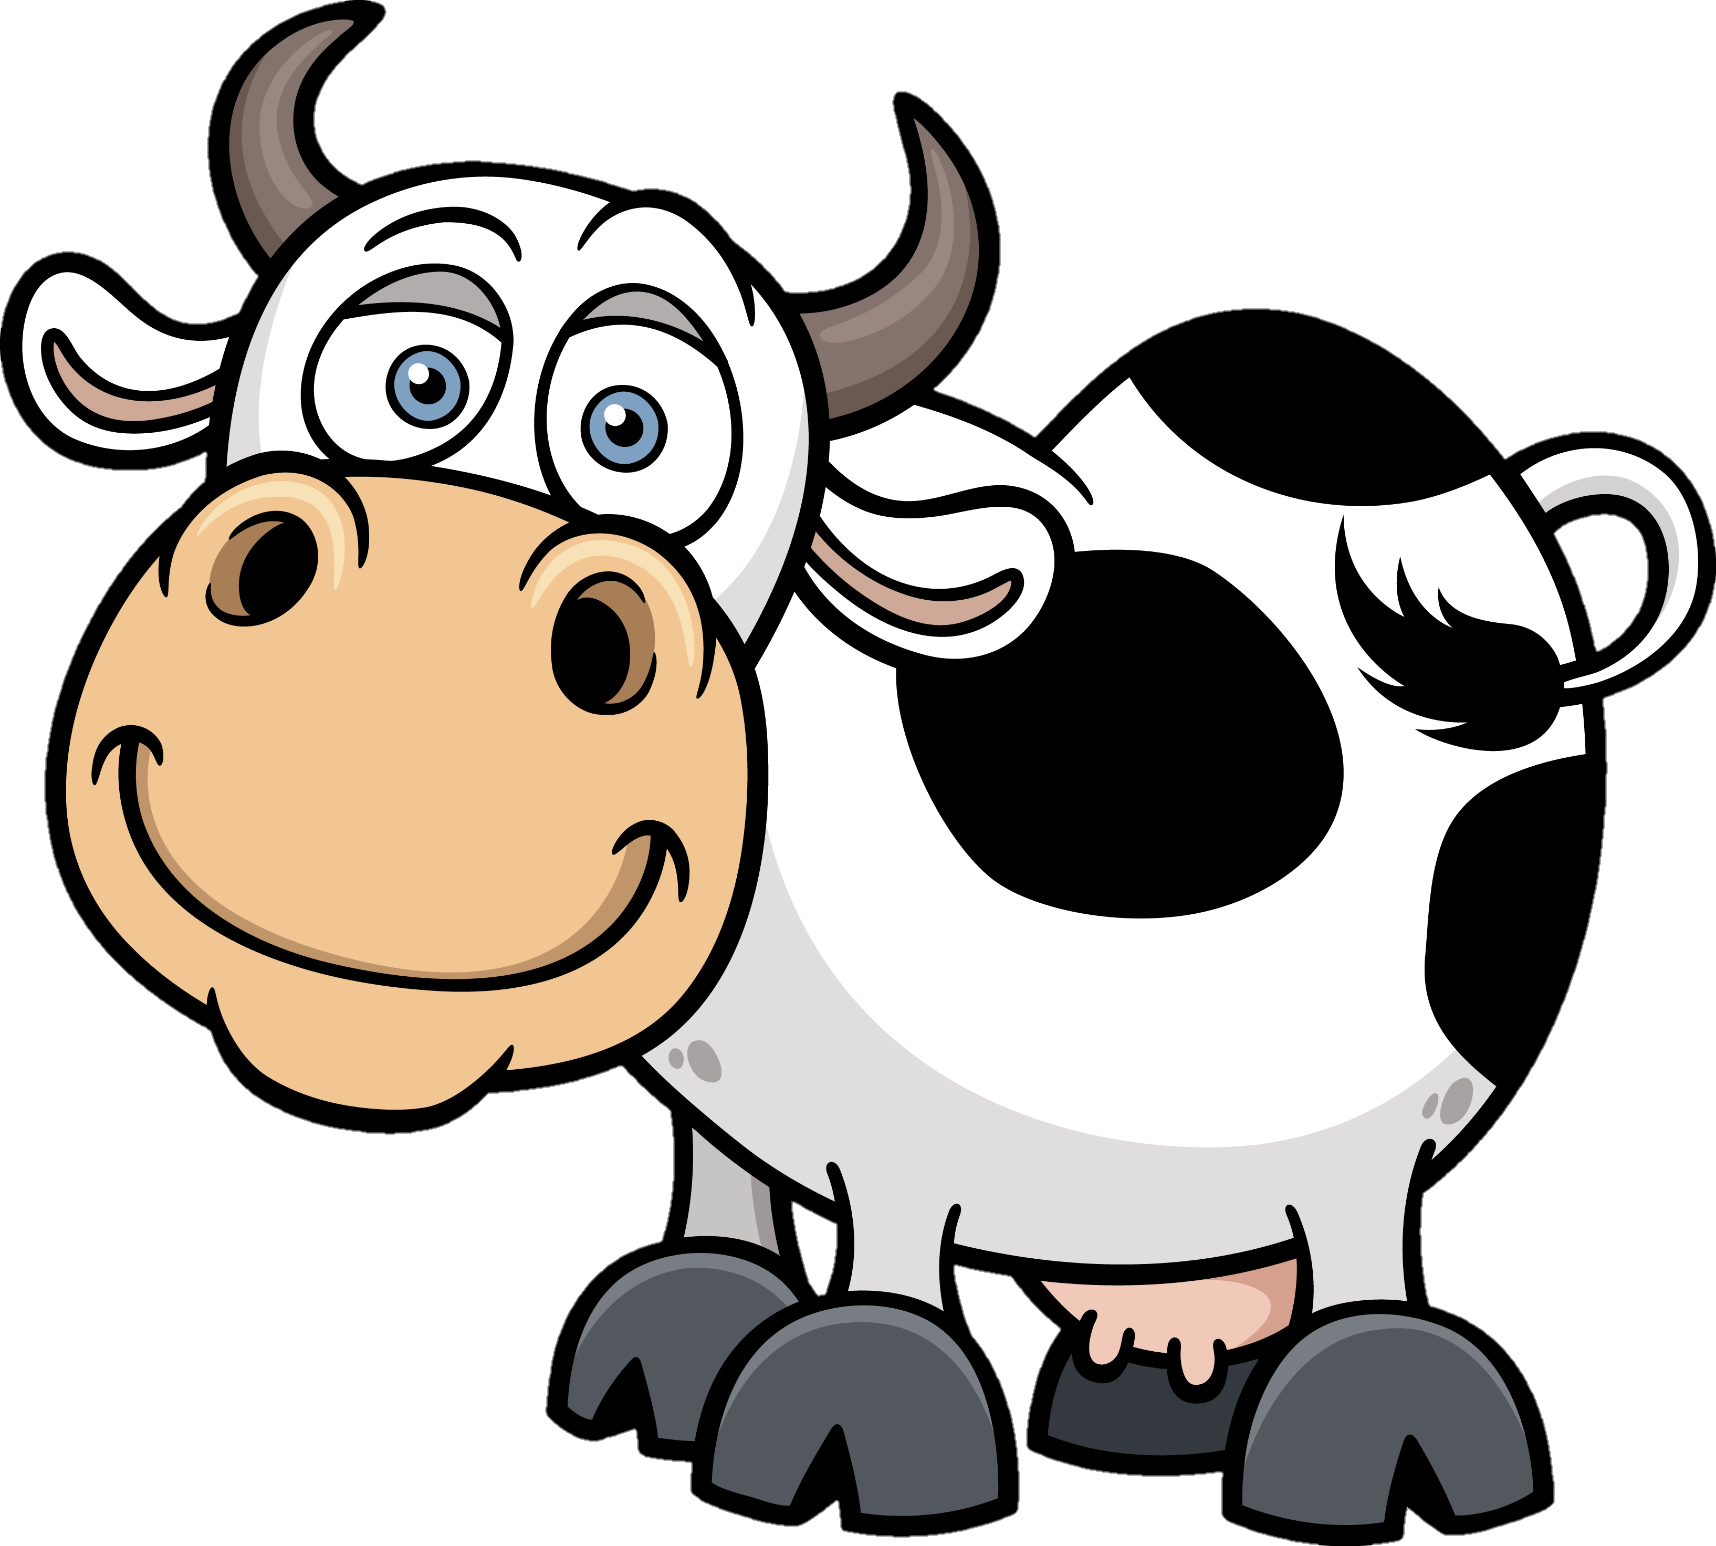 cow-png-from-pngfre-20